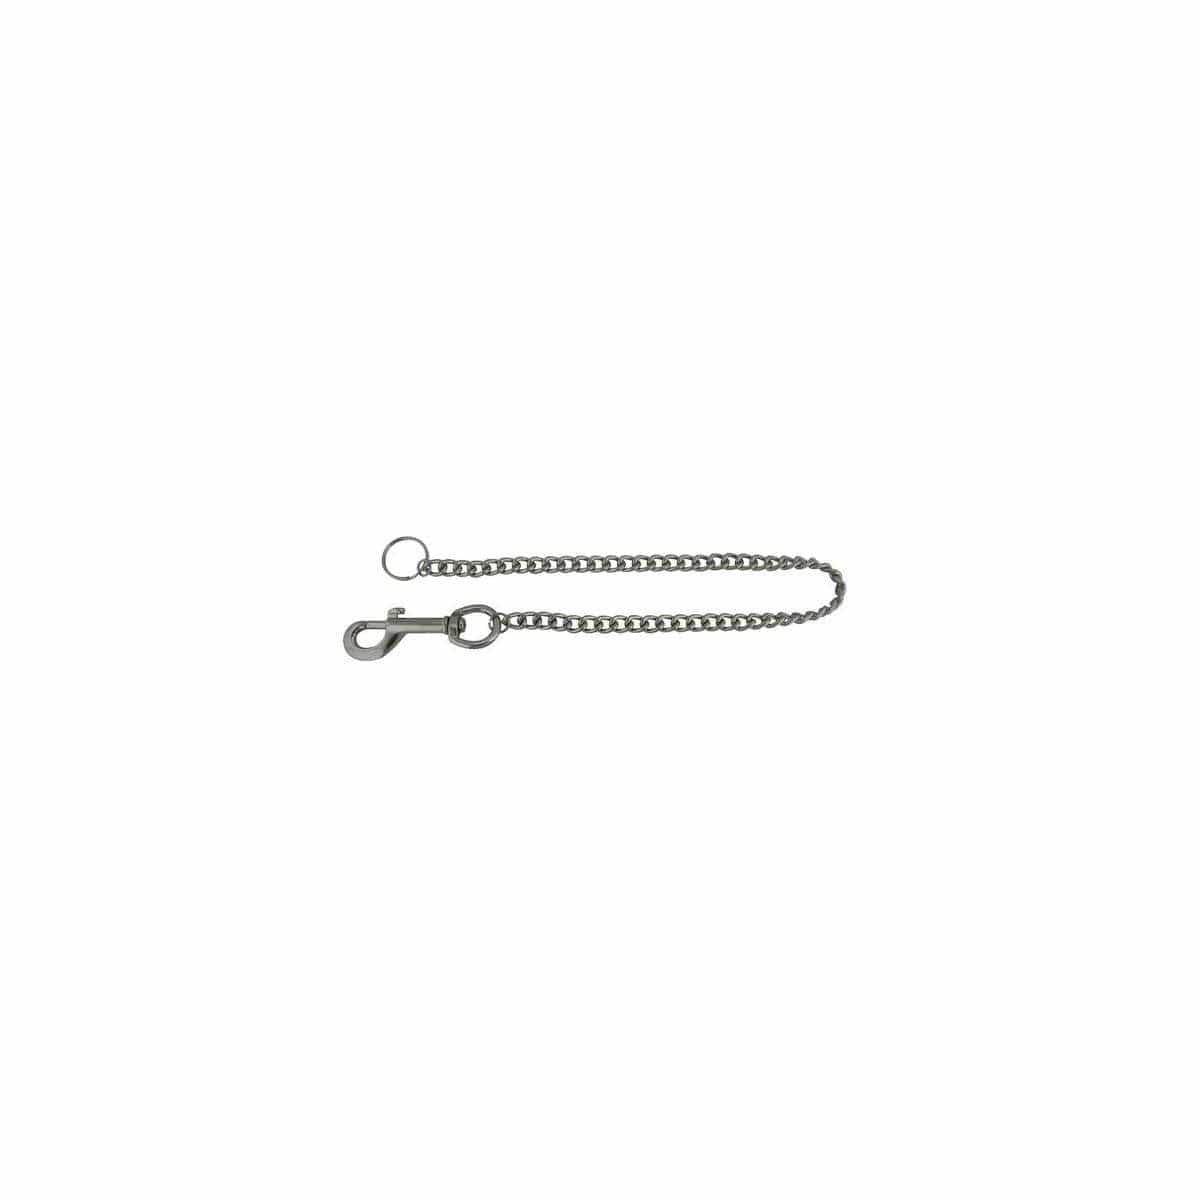 Key Chain Heavy Duty with Large Belt Clip, Chain Length 41cm Service Item Unbranded 902502